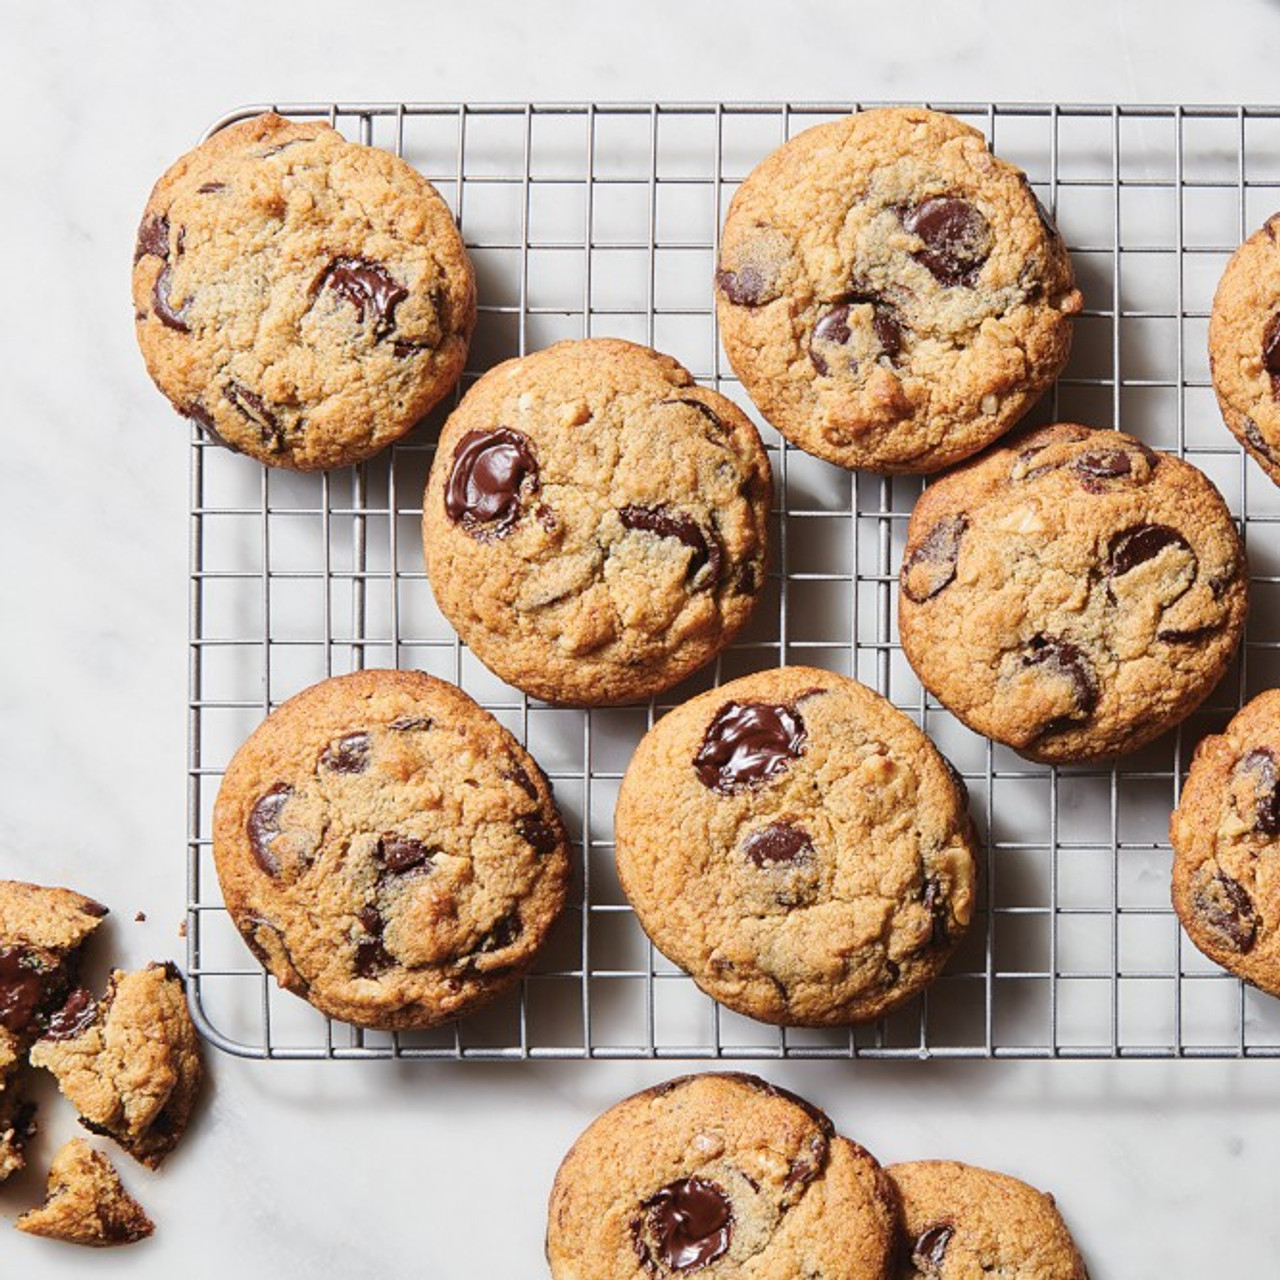 https://cdn11.bigcommerce.com/s-ihwnd7z21q/images/stencil/1280x1280/products/658/5498/201519__Keto-Friendly-Chocolate-Chip-Cookies__64517.1698946394.jpg?c=1